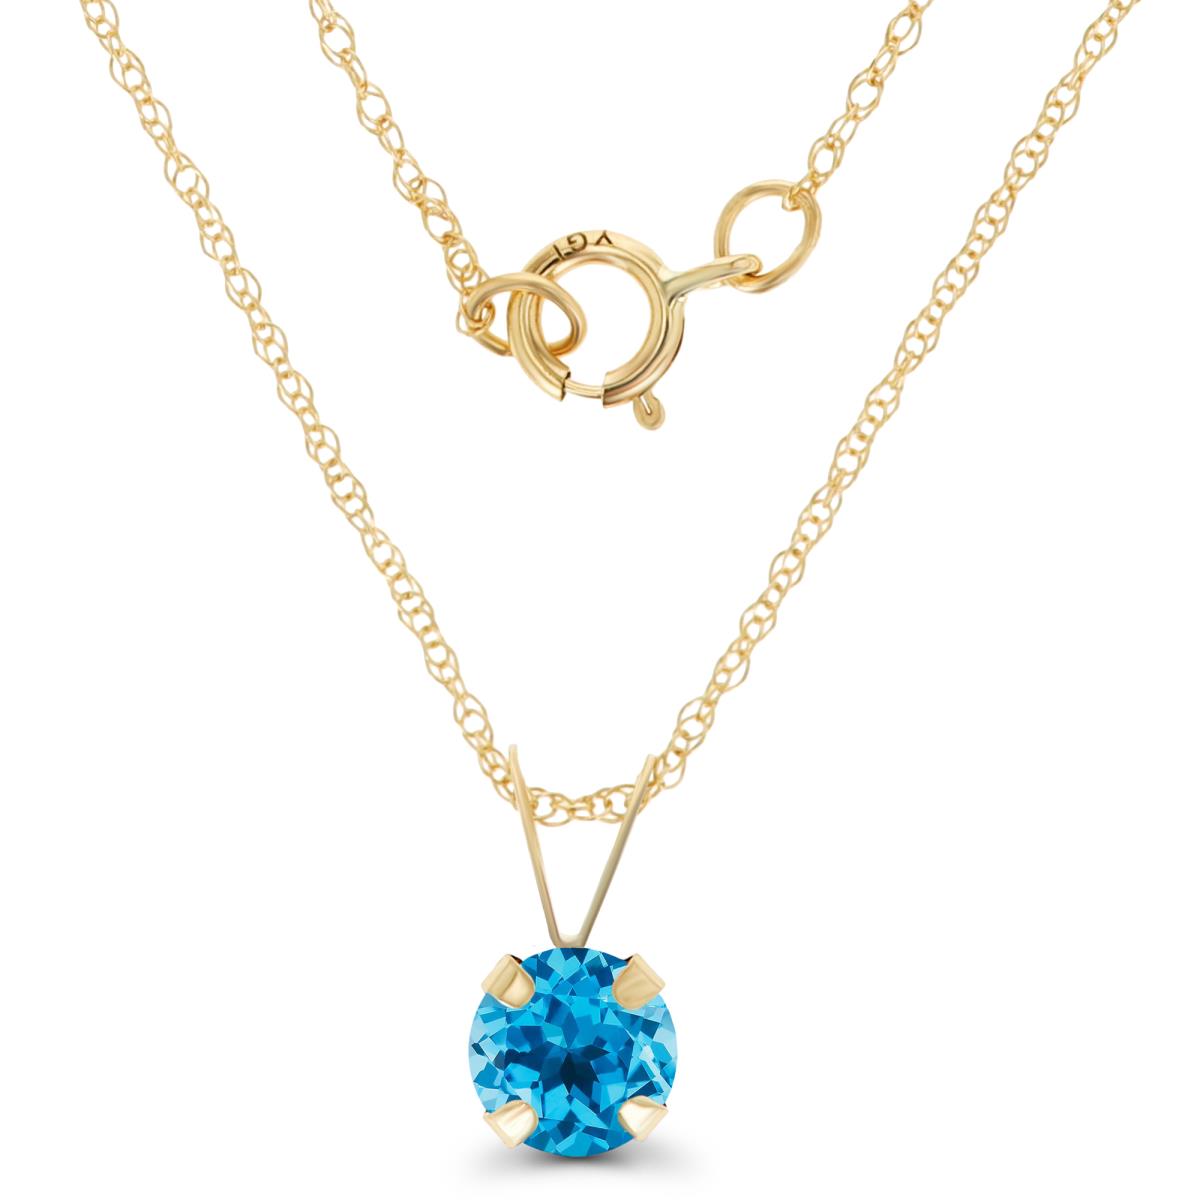 14K Yellow Gold 5mm Round Swiss Blue Topaz 18" Rope Chain Necklace